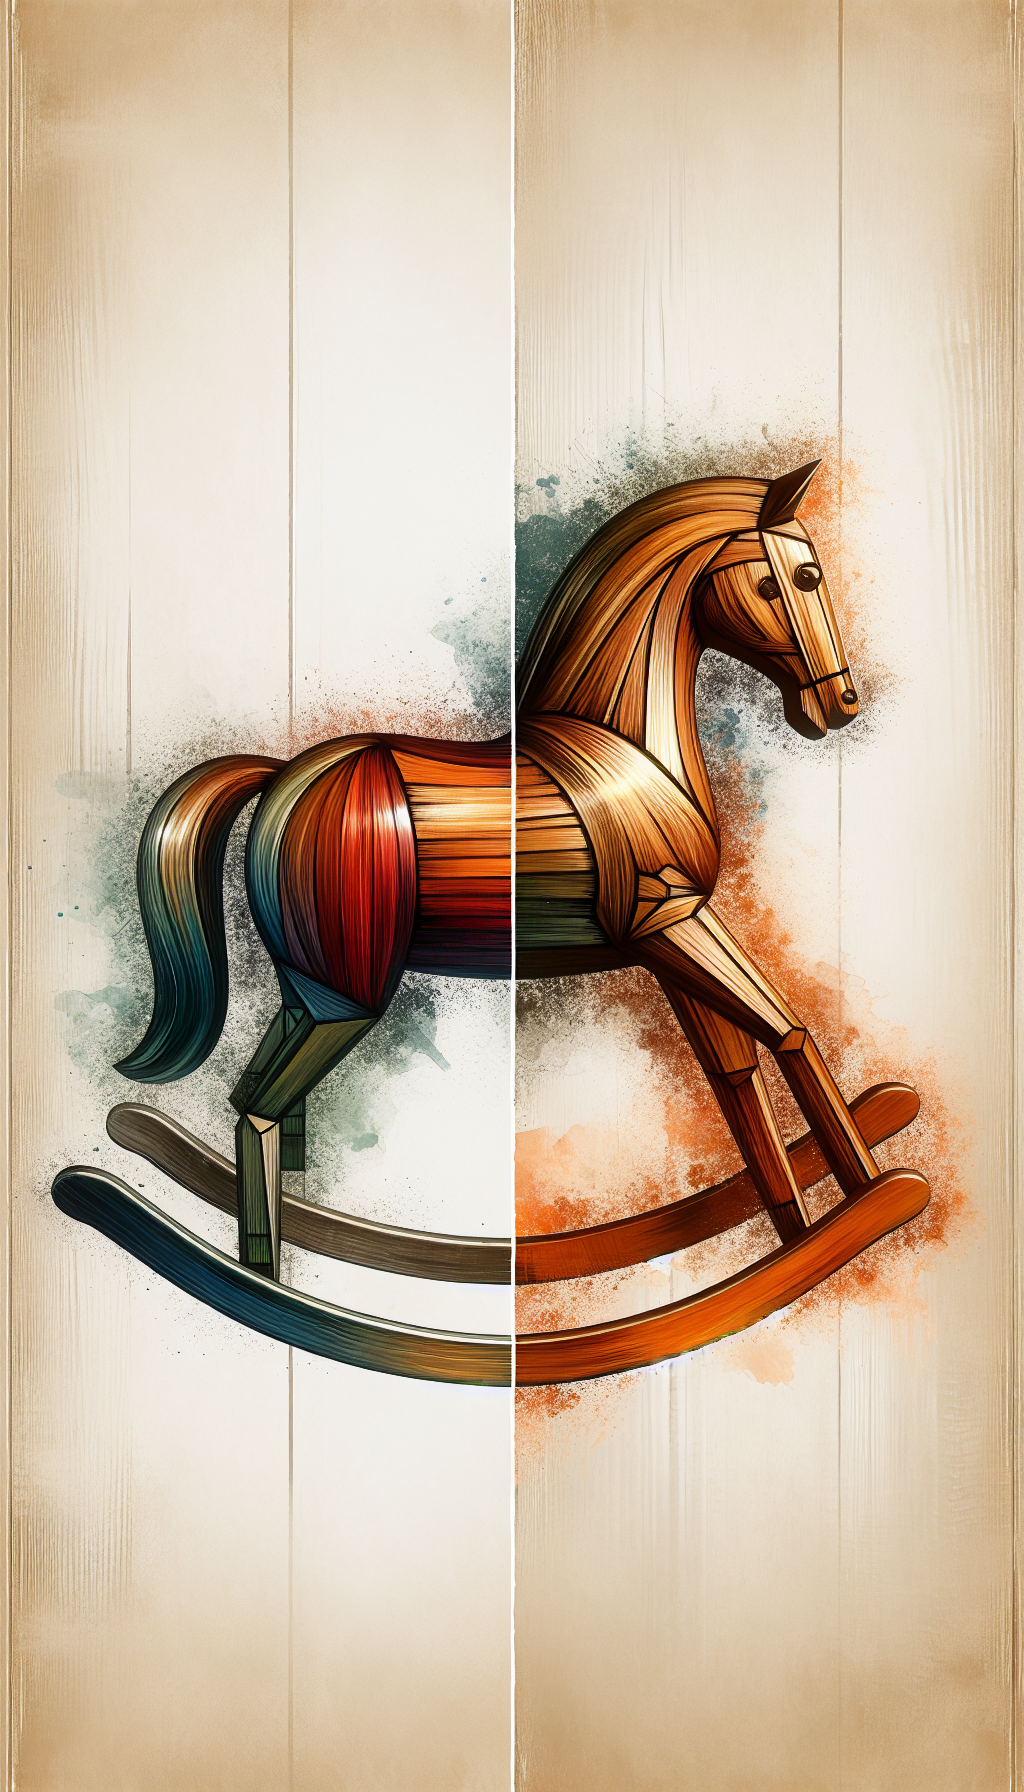 An antique wooden rocking horse stands proudly, half-rejuvenated, with one side meticulously restored, revealing gleaming wood grain and vibrant paint, while the other remains untouched, showcasing its vintage charm. Artistic styles collide as sharp, geometric lines delineate the restored half, and soft, watercolor strokes represent its preserved counterpart, symbolizing a balance between restoration and preservation.